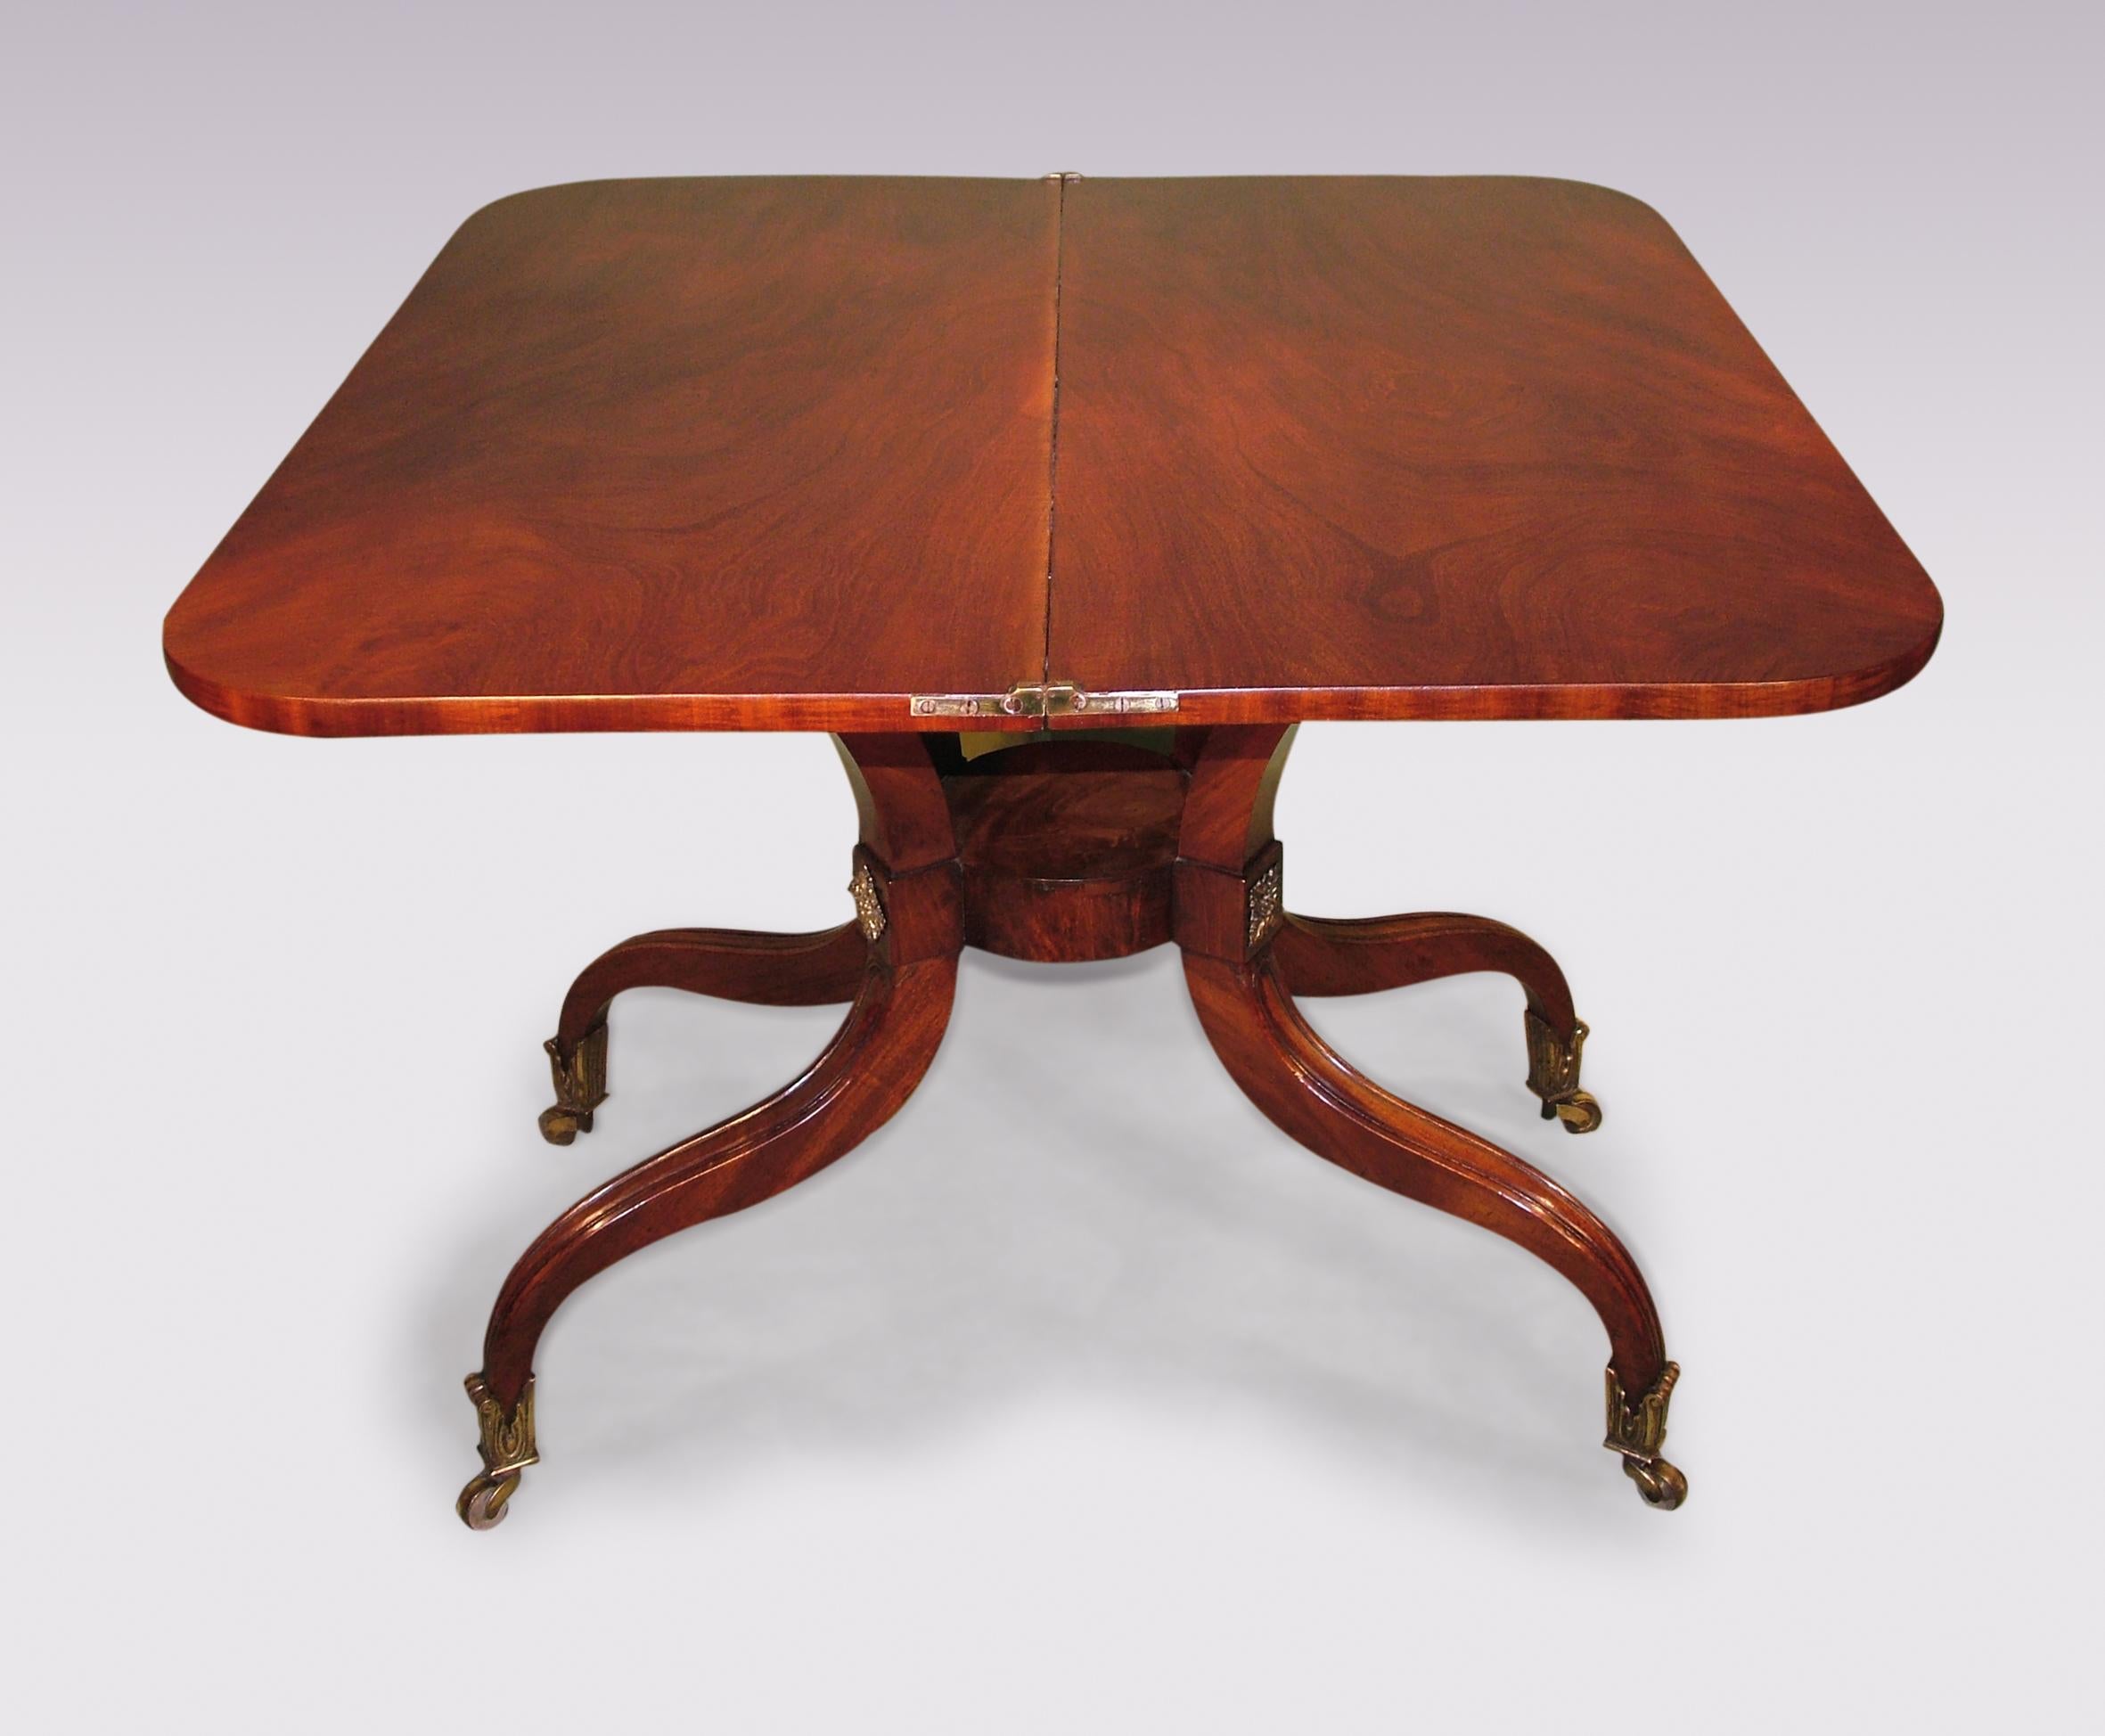 An early 19th century Regency period well-figured mahogany tea table, having rectangular top above narrow, shaped frieze raised on brass-mounted and moulded scroll umbrella-shaped legs joined by circular platform ending on original foliate castors.